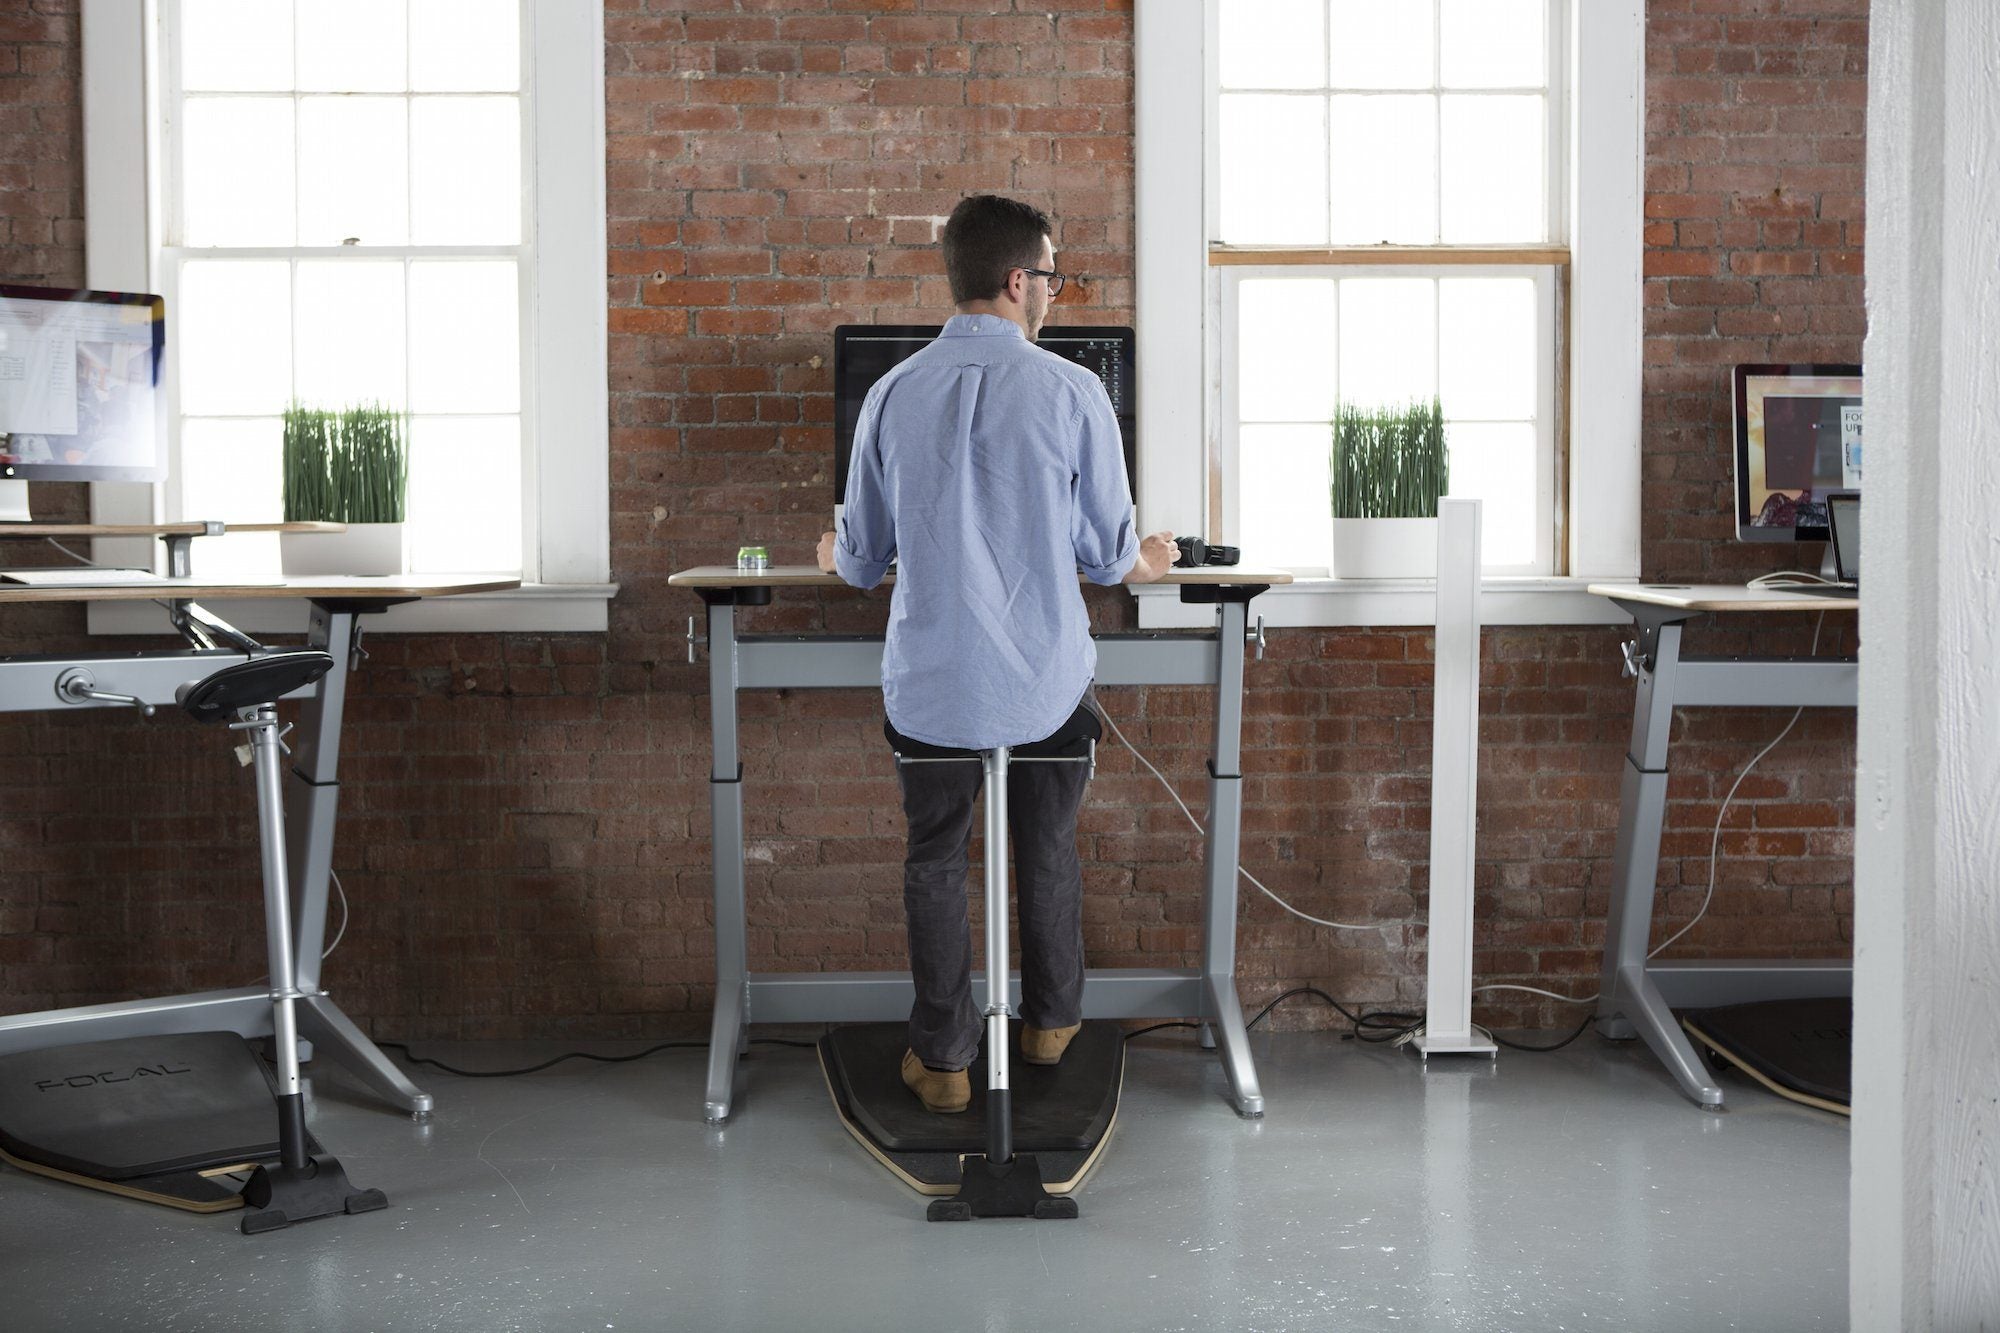 Focal Locus Standing Desk By Safco From Fitneff United States